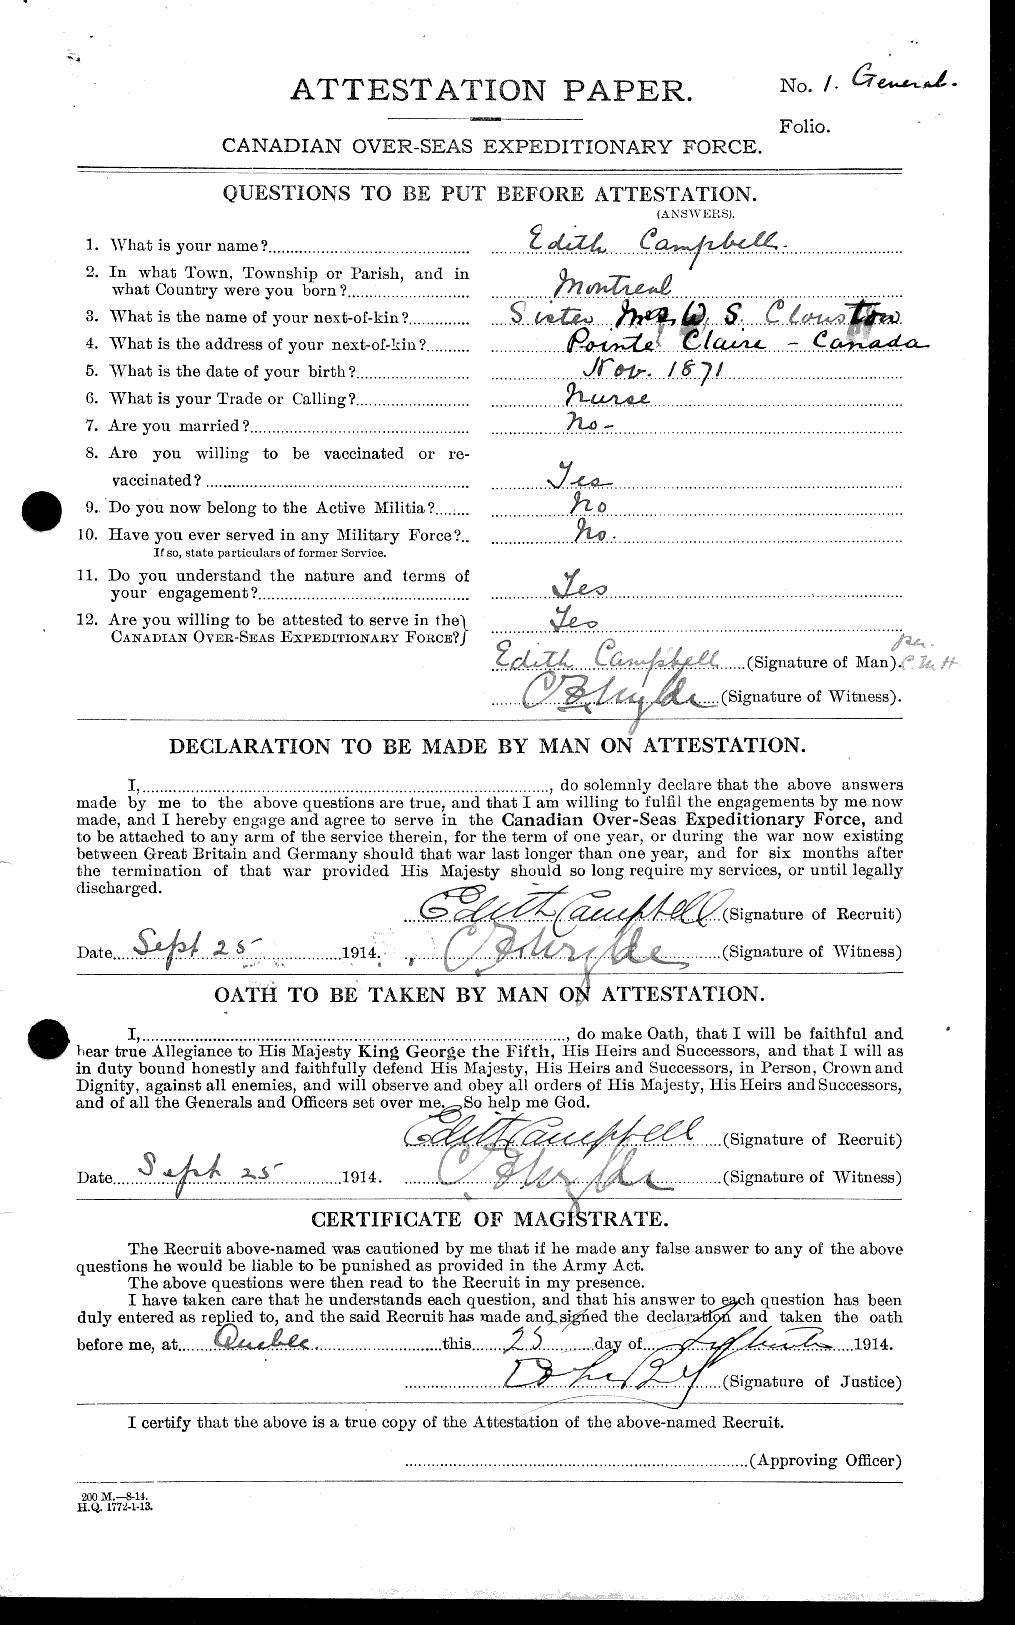 Personnel Records of the First World War - CEF 008246a